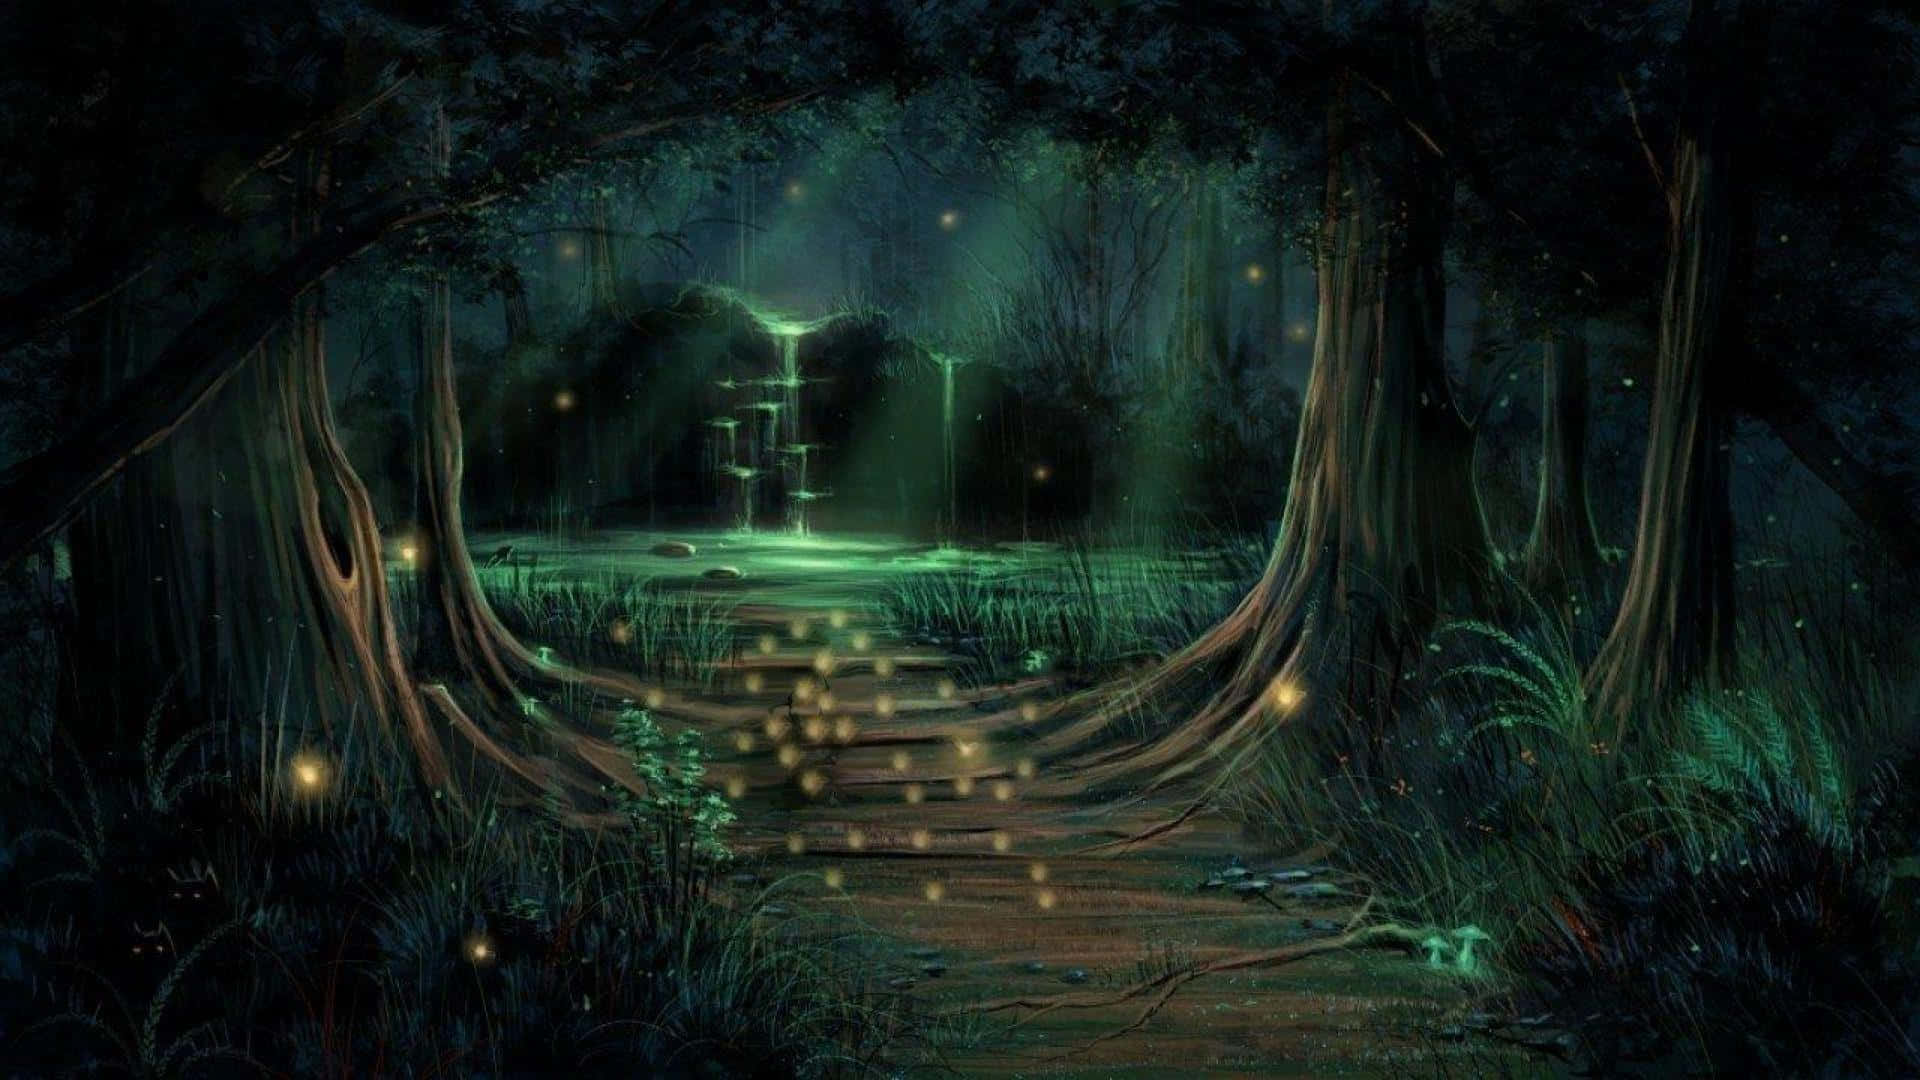 Mystical Path through the Enchanted Forest